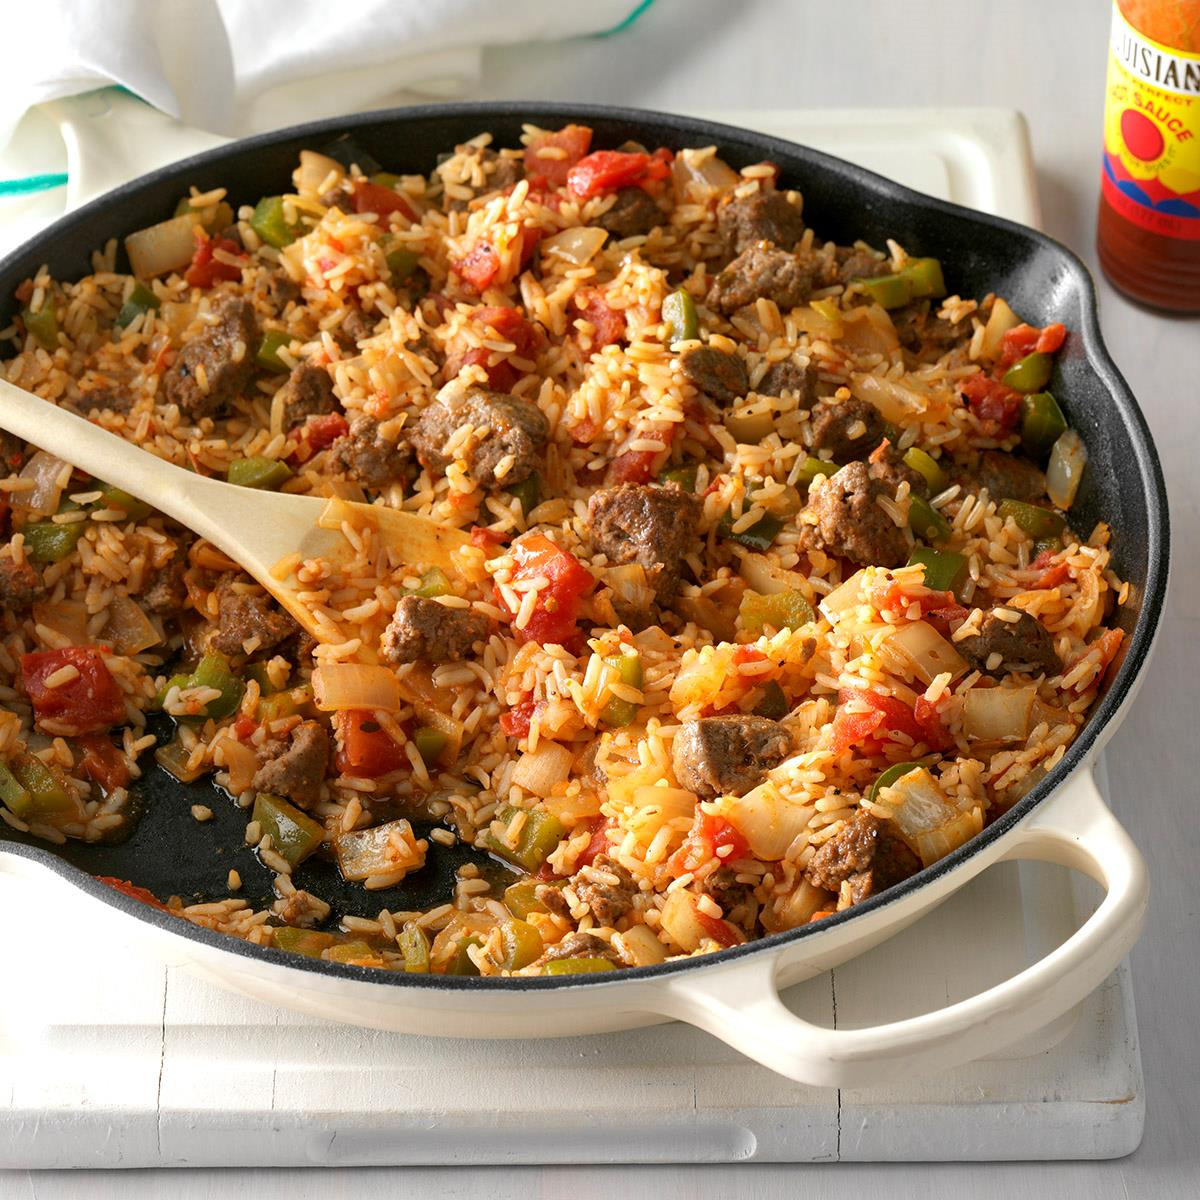 Recipes With Italian Sausage And Rice
 Spicy Cajun Sausage and Rice Skillet Recipe